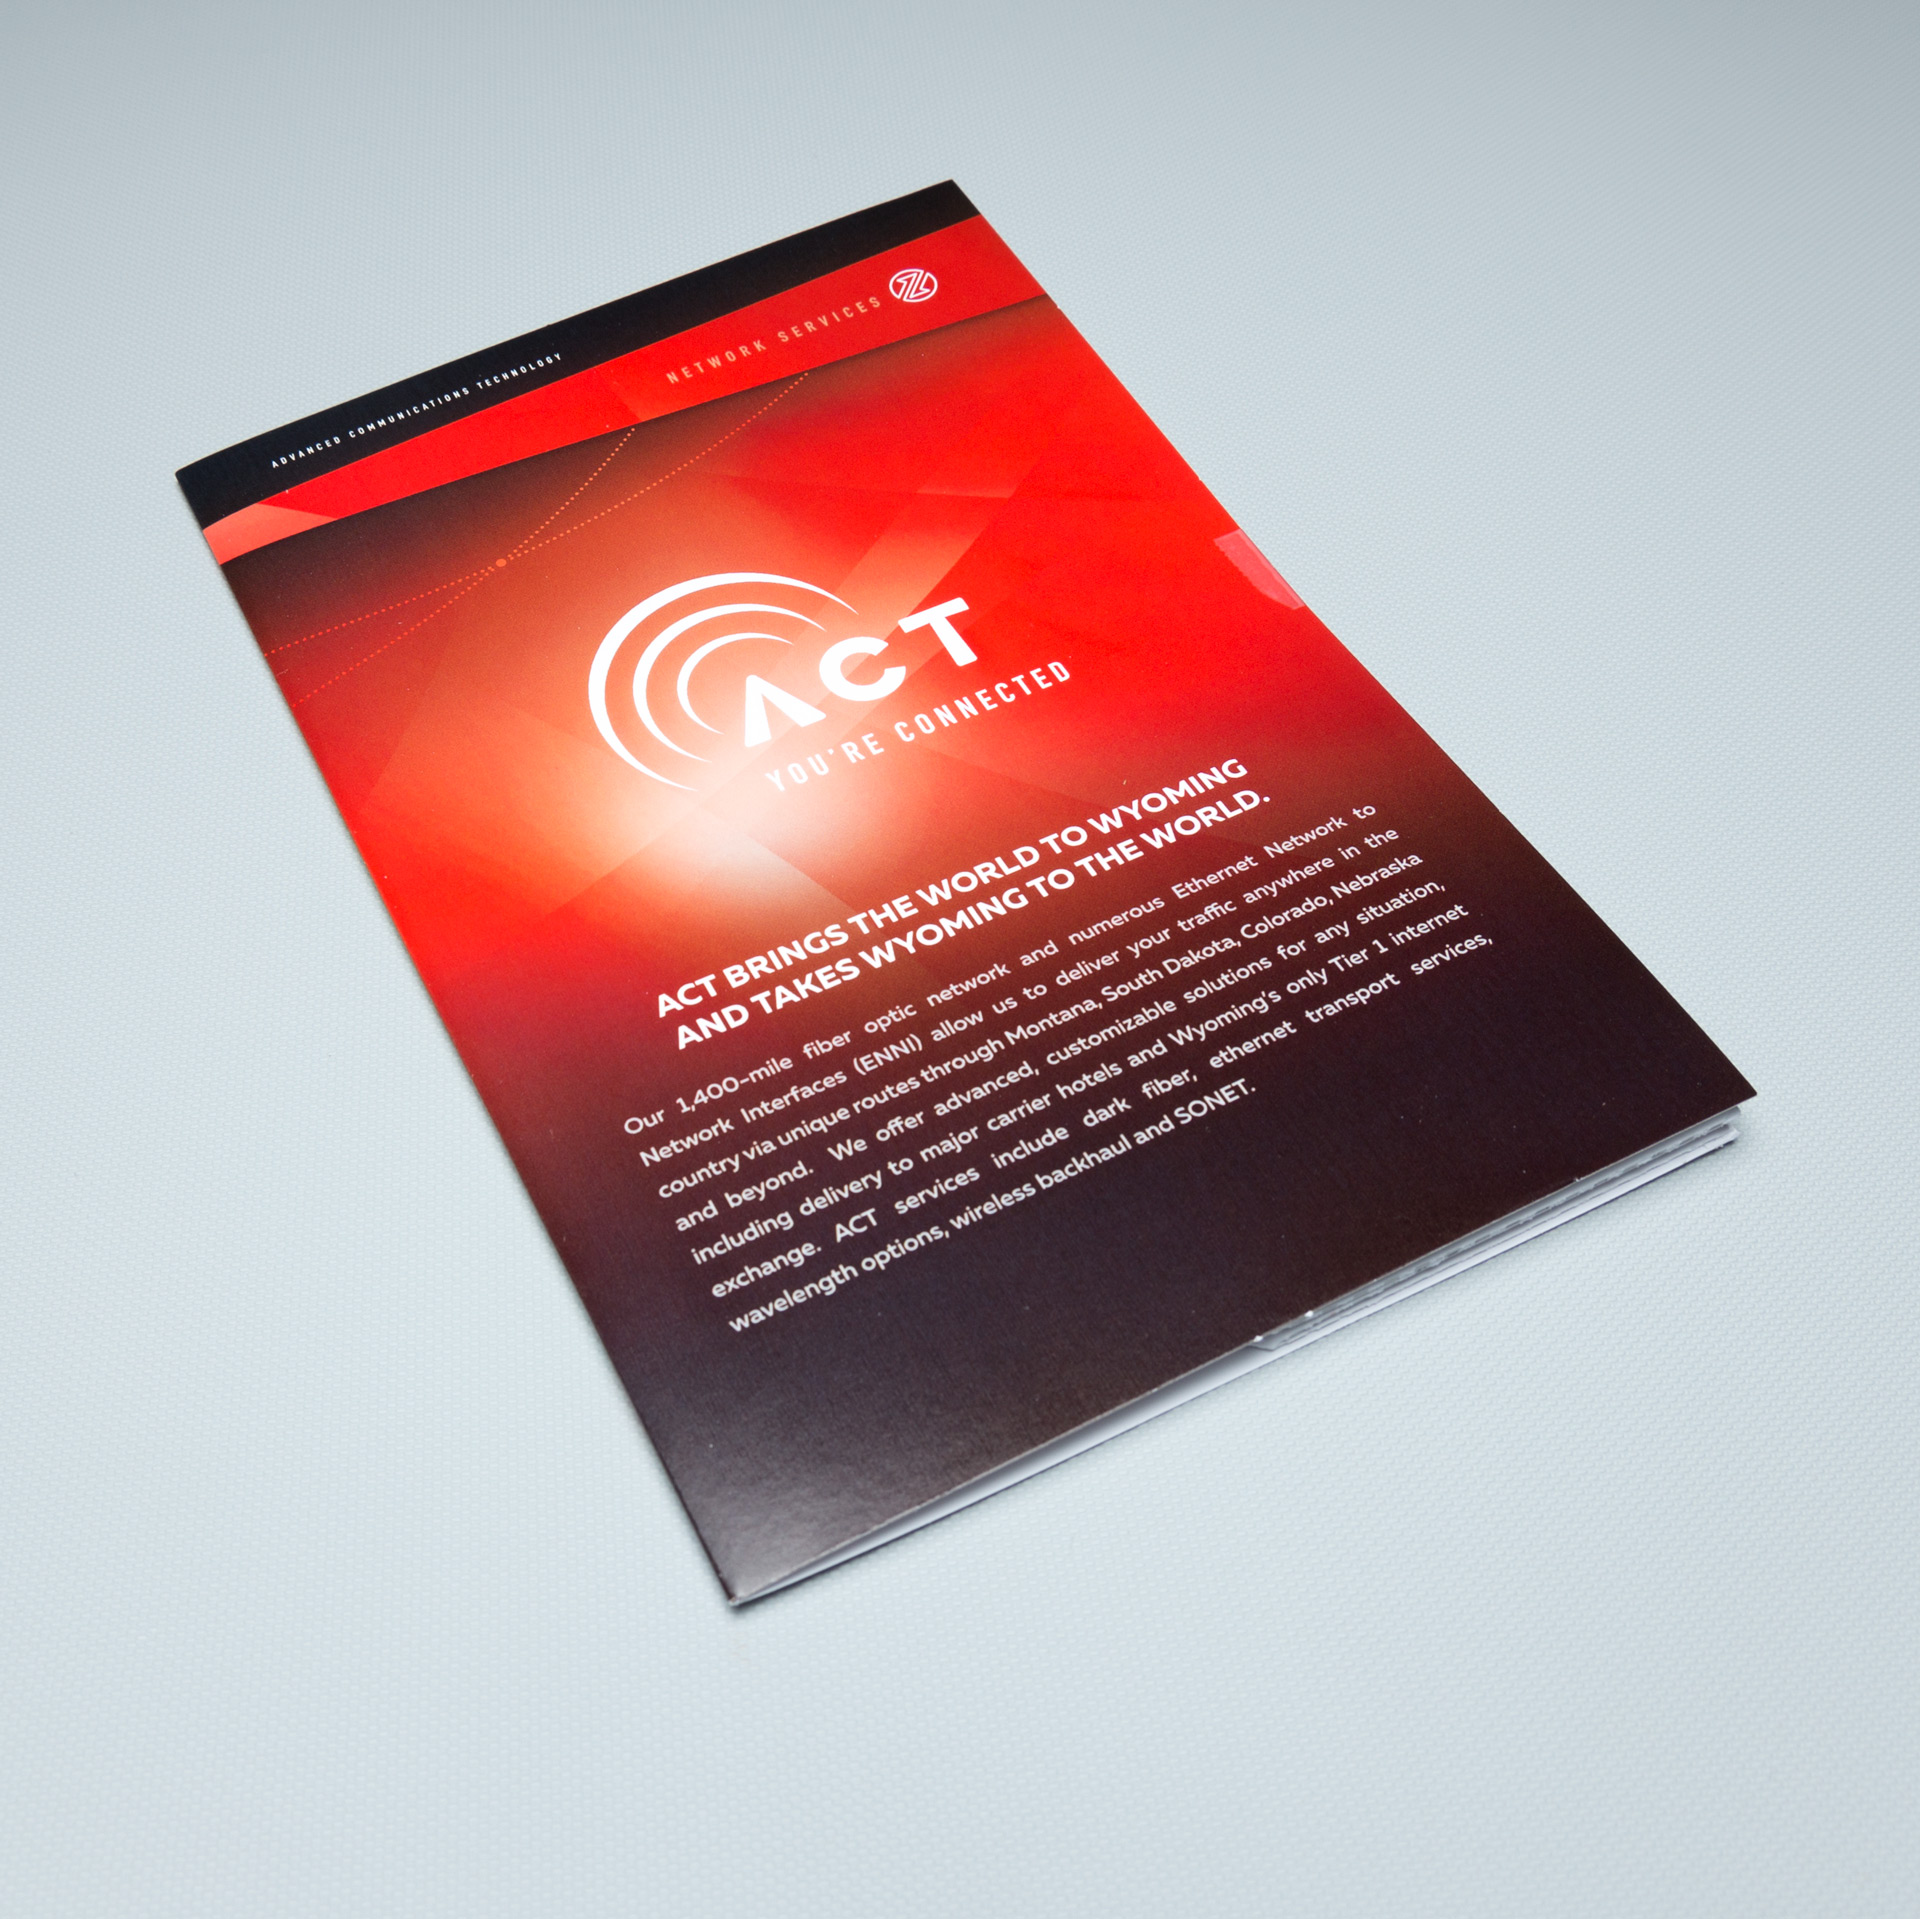 Advanced Communications Technology (ACT) Engages Prospects with the Large Exploding Page